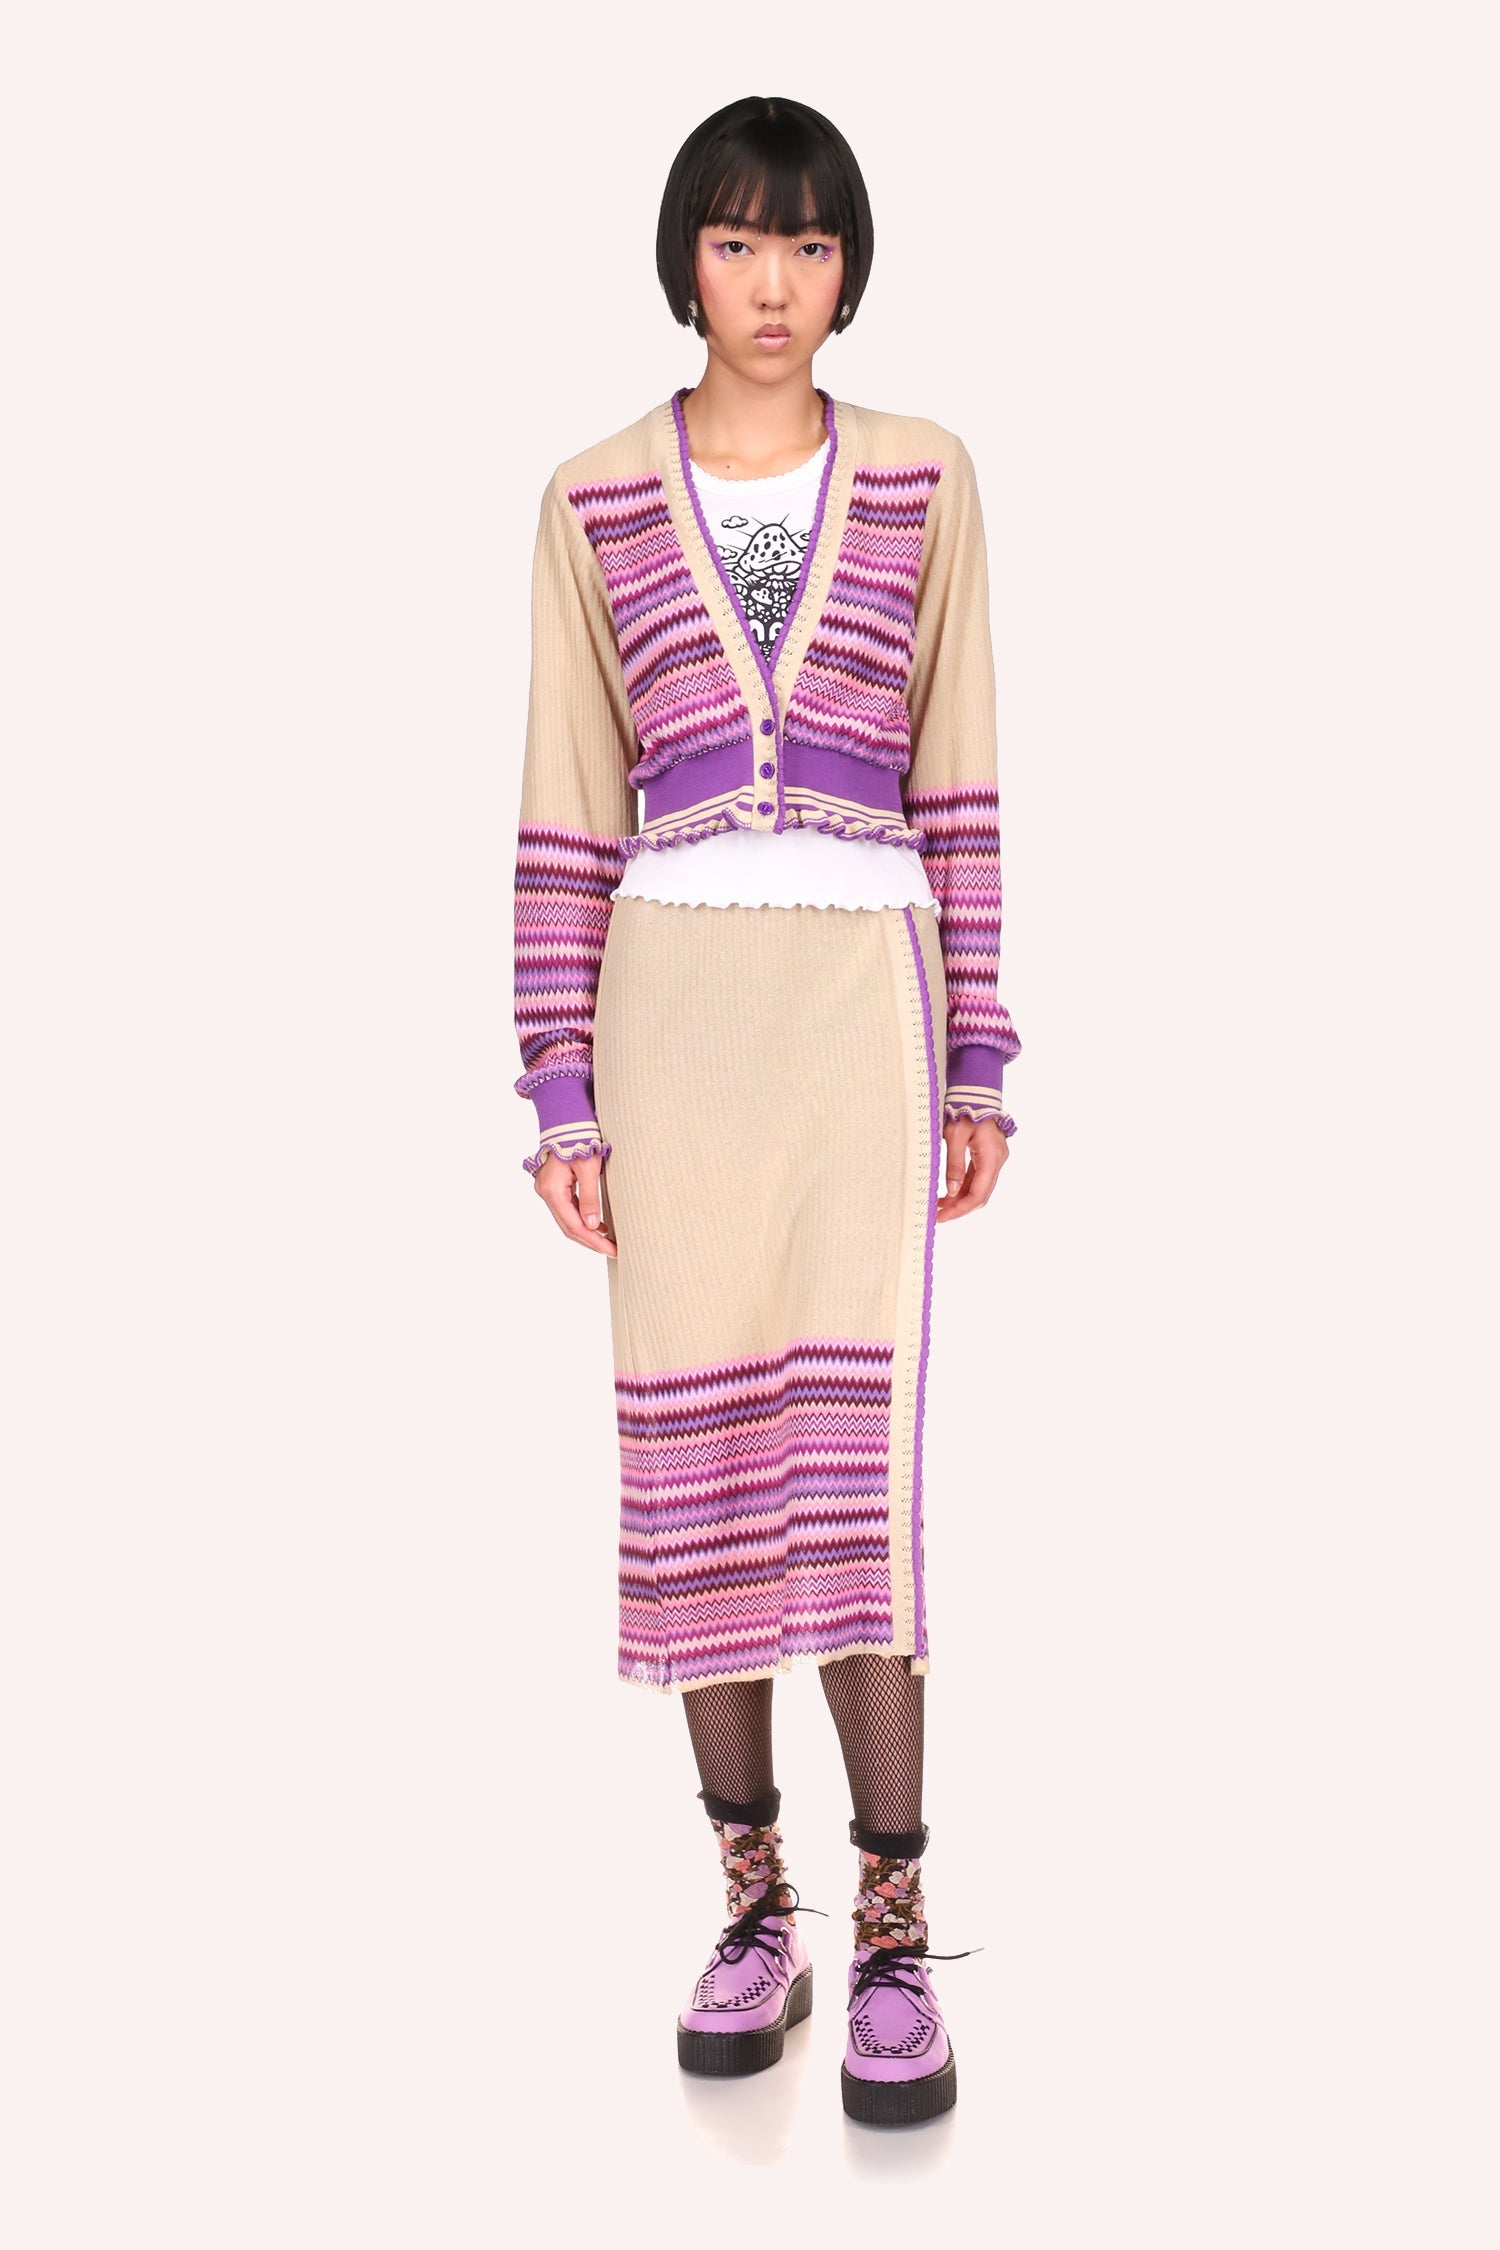 Tonal Zigzag Skirt lavender is a match for Tonal Zigzag Cropped Cardigan lavender